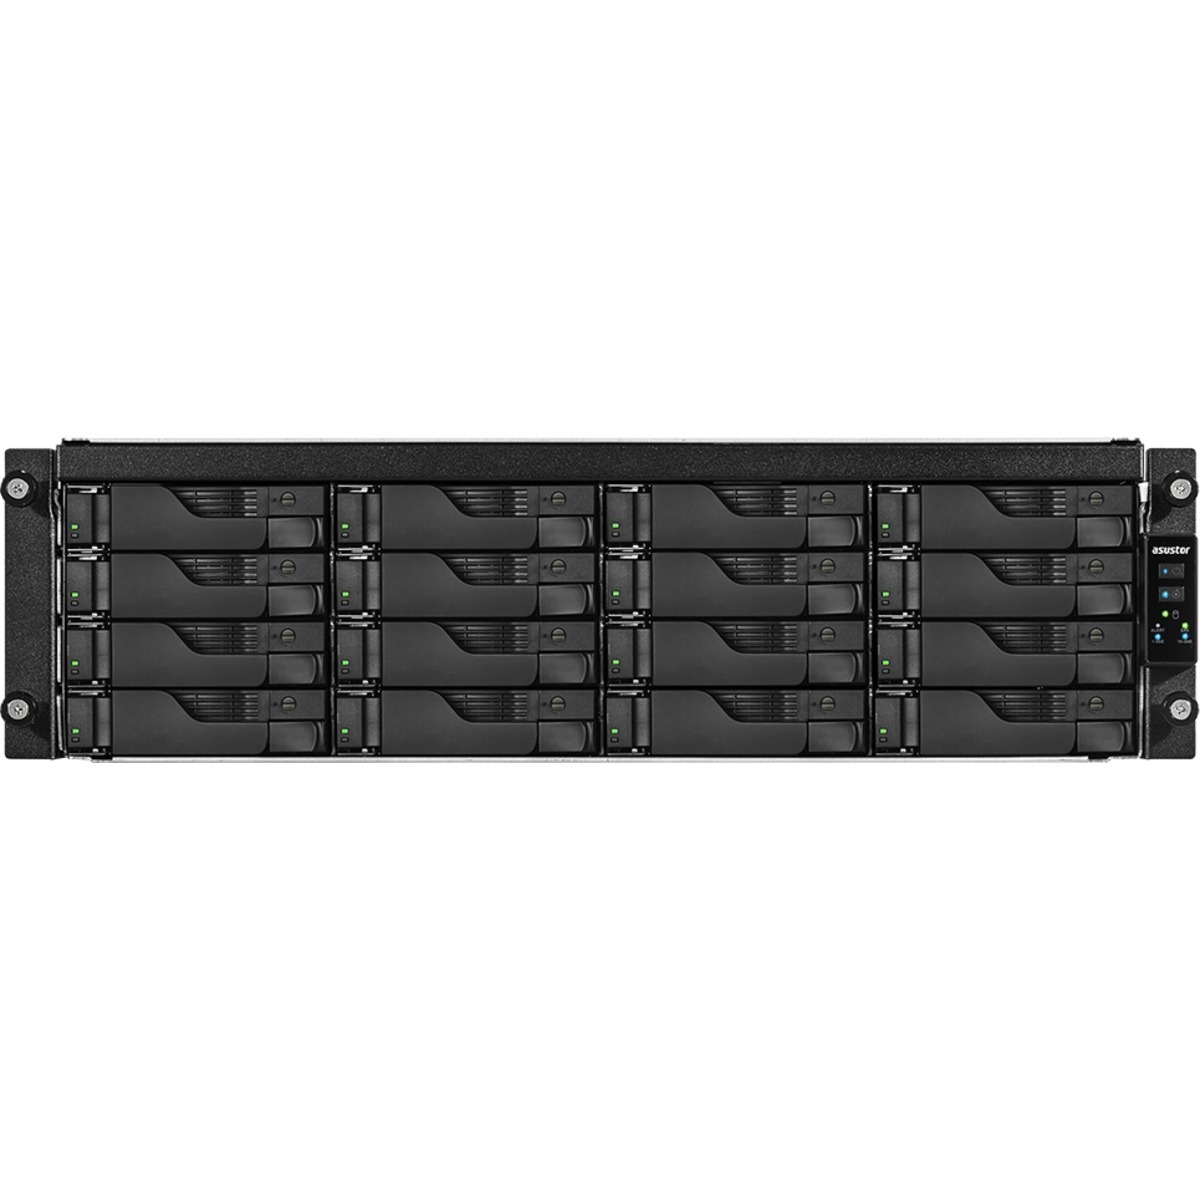 ASUSTOR AS7116RDX Lockerstor 16R Pro 80tb 16-Bay RackMount Large Business / Enterprise NAS - Network Attached Storage Device 10x8tb Seagate IronWolf Pro ST8000NT001 3.5 7200rpm SATA 6Gb/s HDD NAS Class Drives Installed - Burn-In Tested - ON SALE AS7116RDX Lockerstor 16R Pro